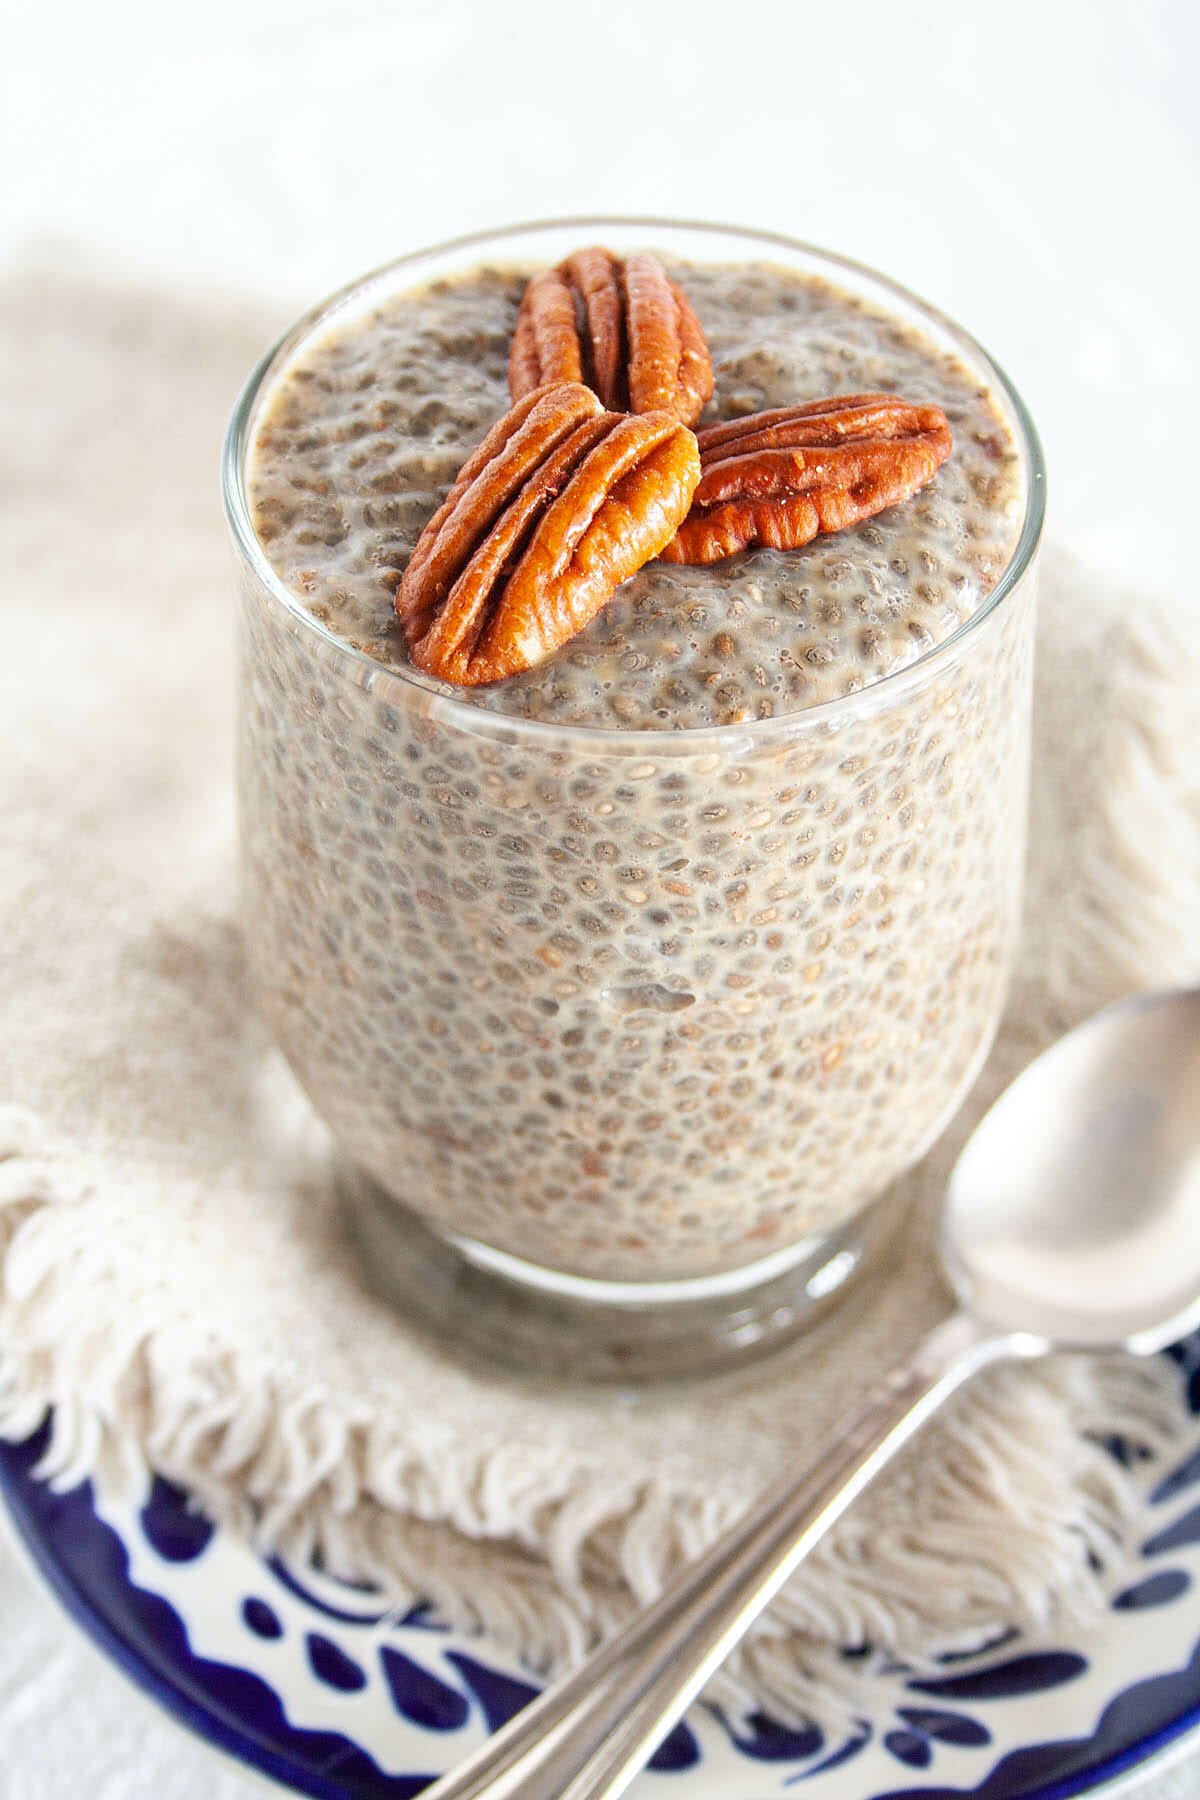 Gingerbread Chia Pudding with a spoon.